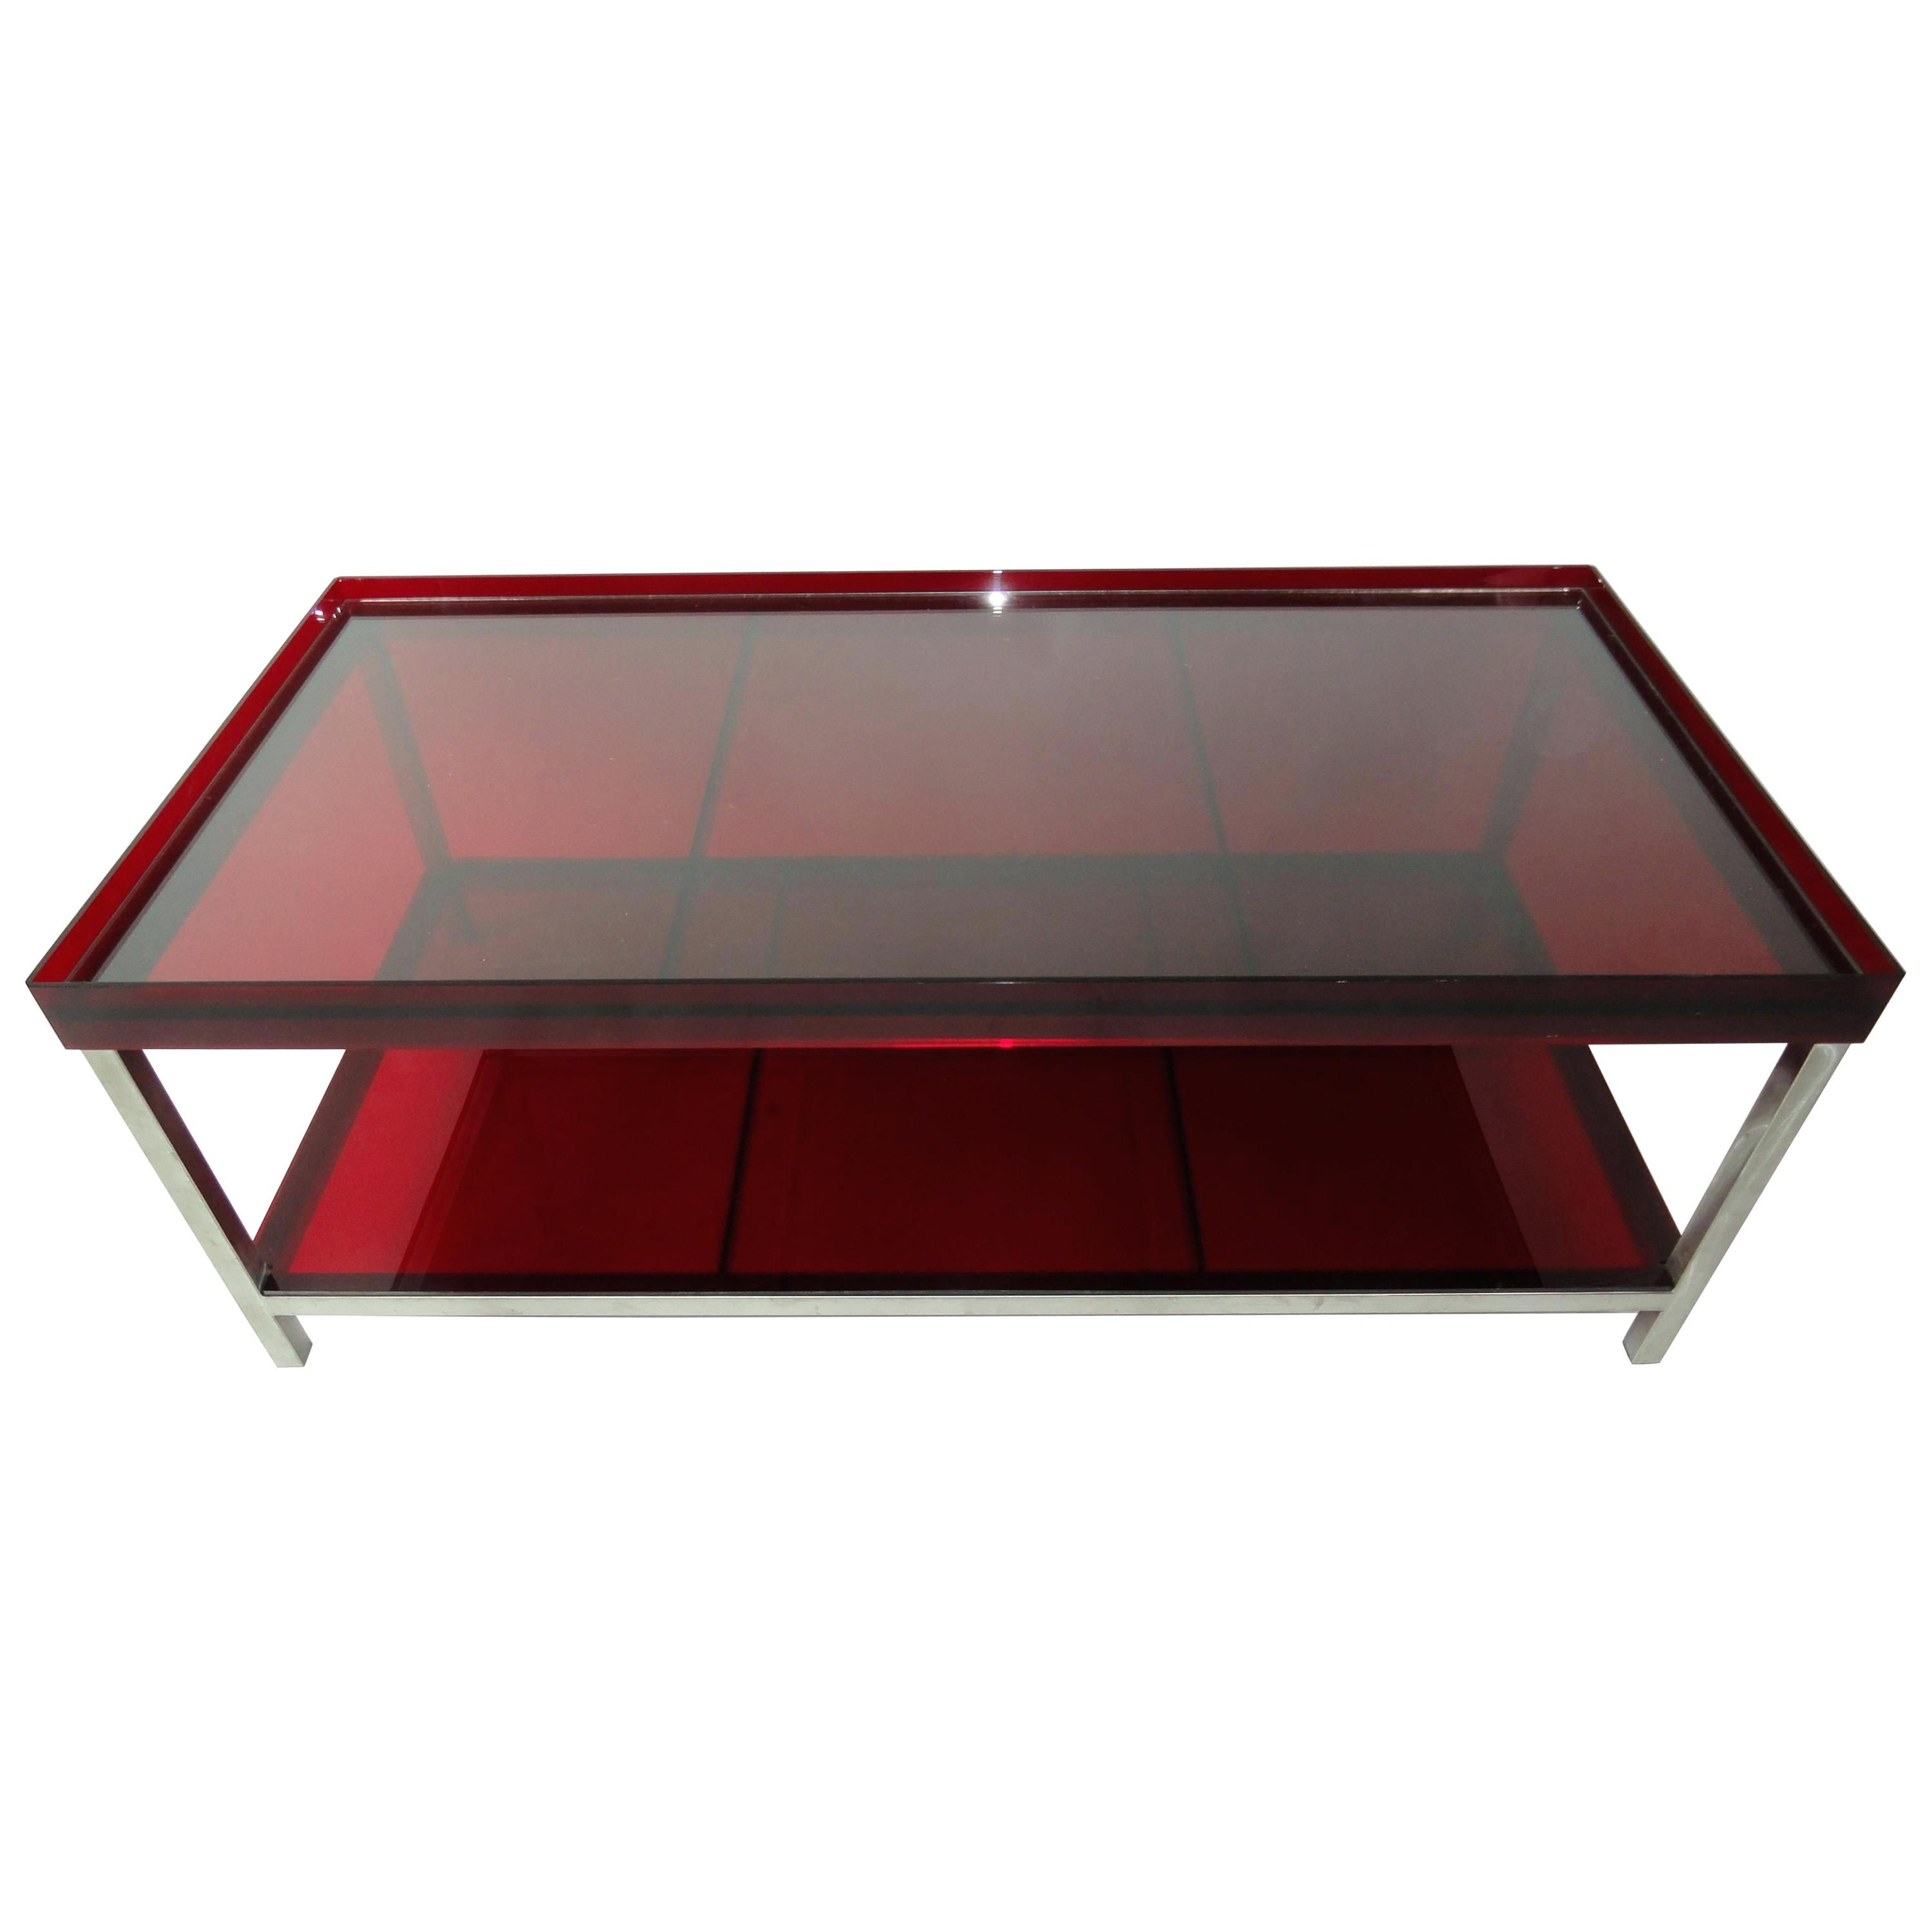 Acrylic Coffee Tables Acrylic Brass Coffee Table Lucite Coffee Throughout Stately Acrylic Coffee Tables (View 16 of 30)